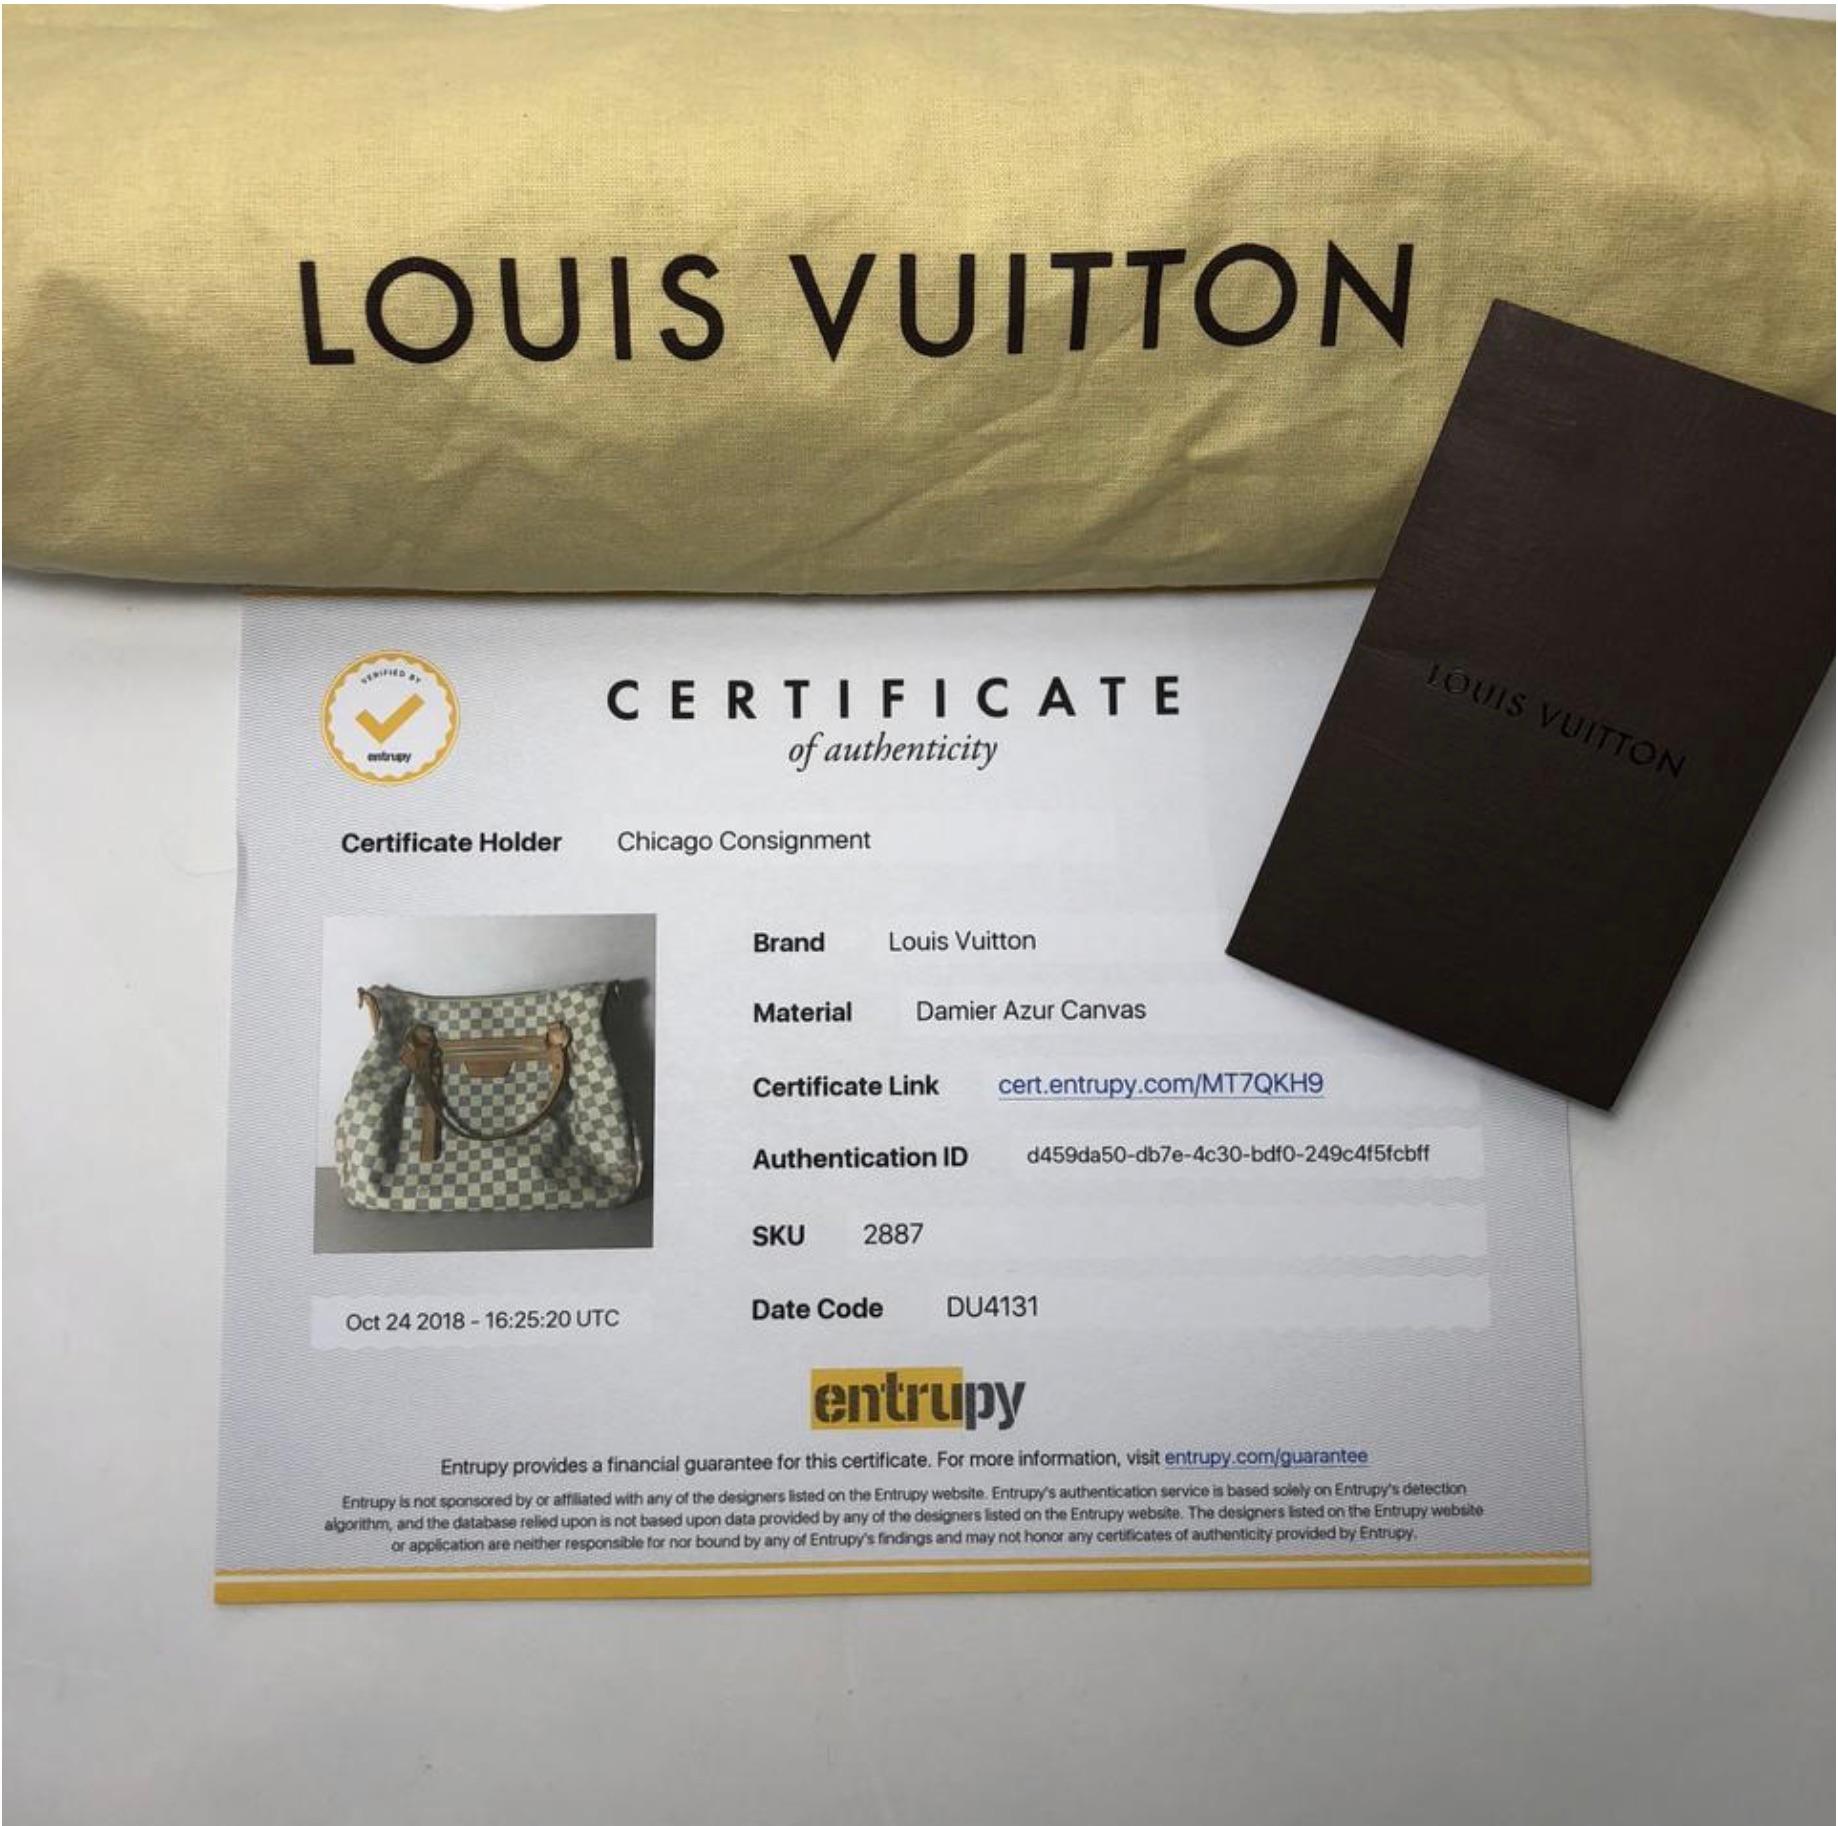 MODEL - Louis Vuitton Damier Azur Evora MM Shoulder Handbag

CONDITION - Exceptional. Light vachette, very light watermark, no dryness and no cracking. Bright and shiny hardware with no tarnishing or chipping. No rips, holes, tears, stains or odors.